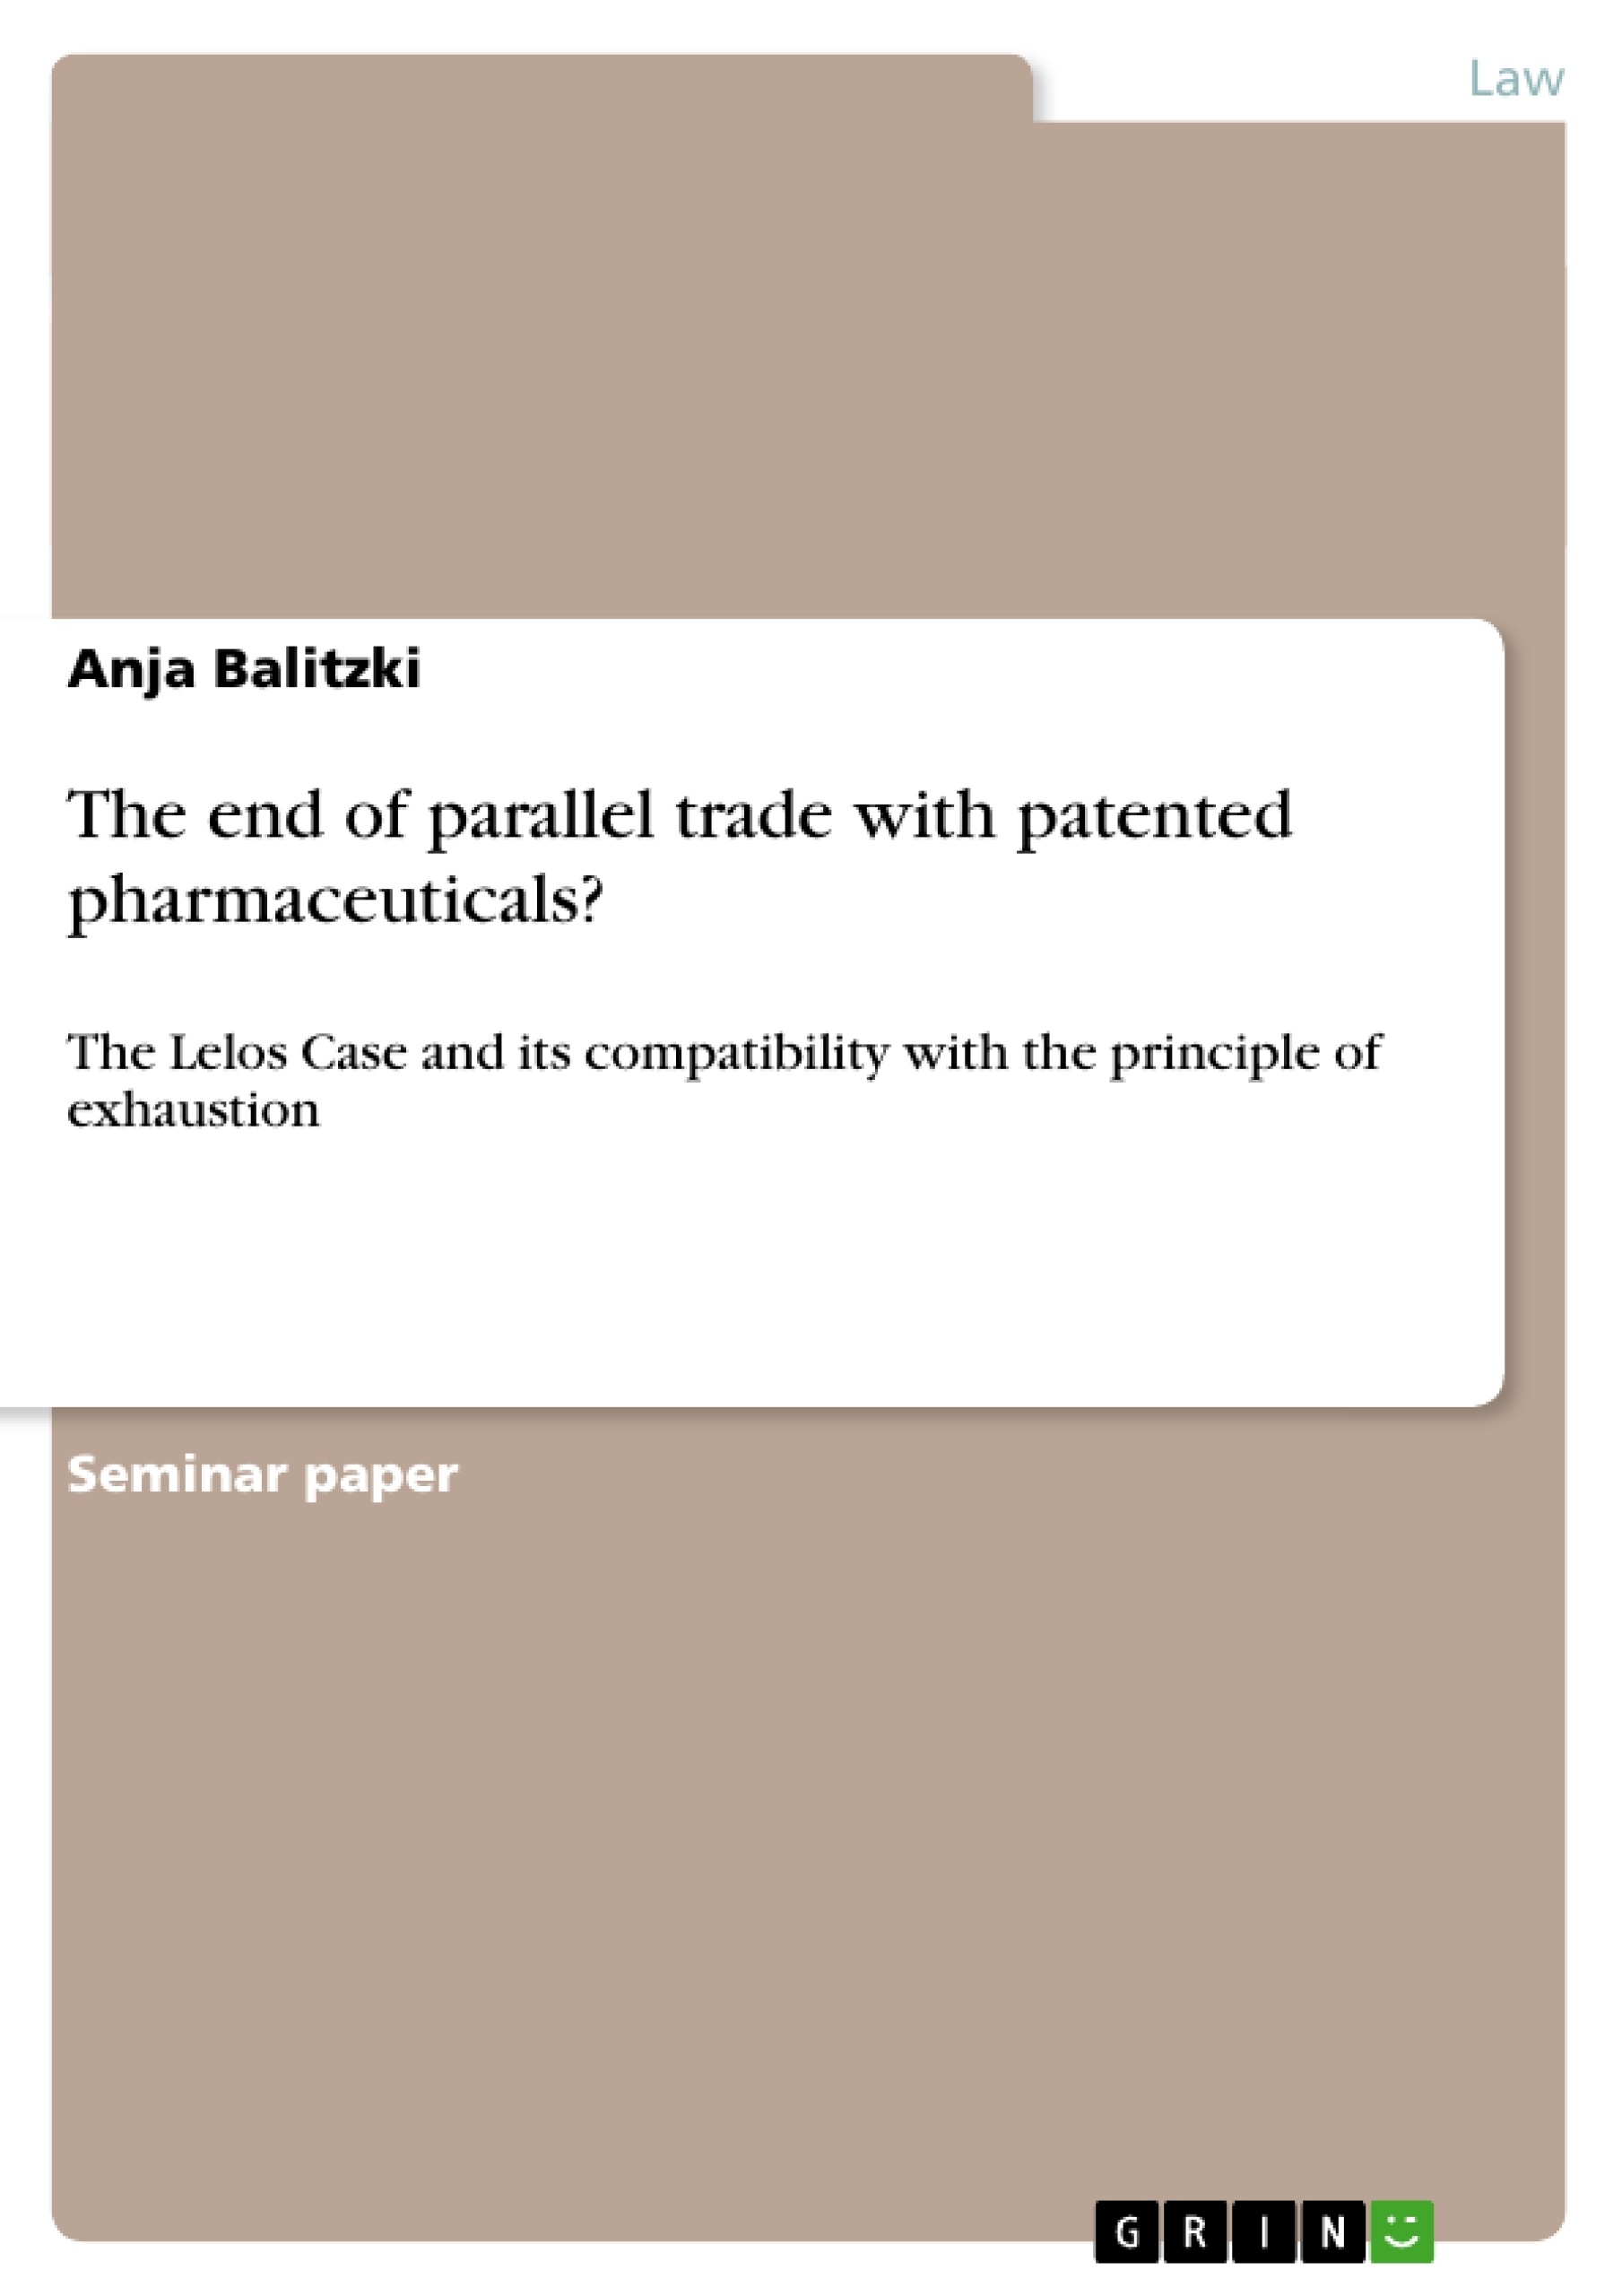 Title: The end of parallel trade with patented pharmaceuticals?